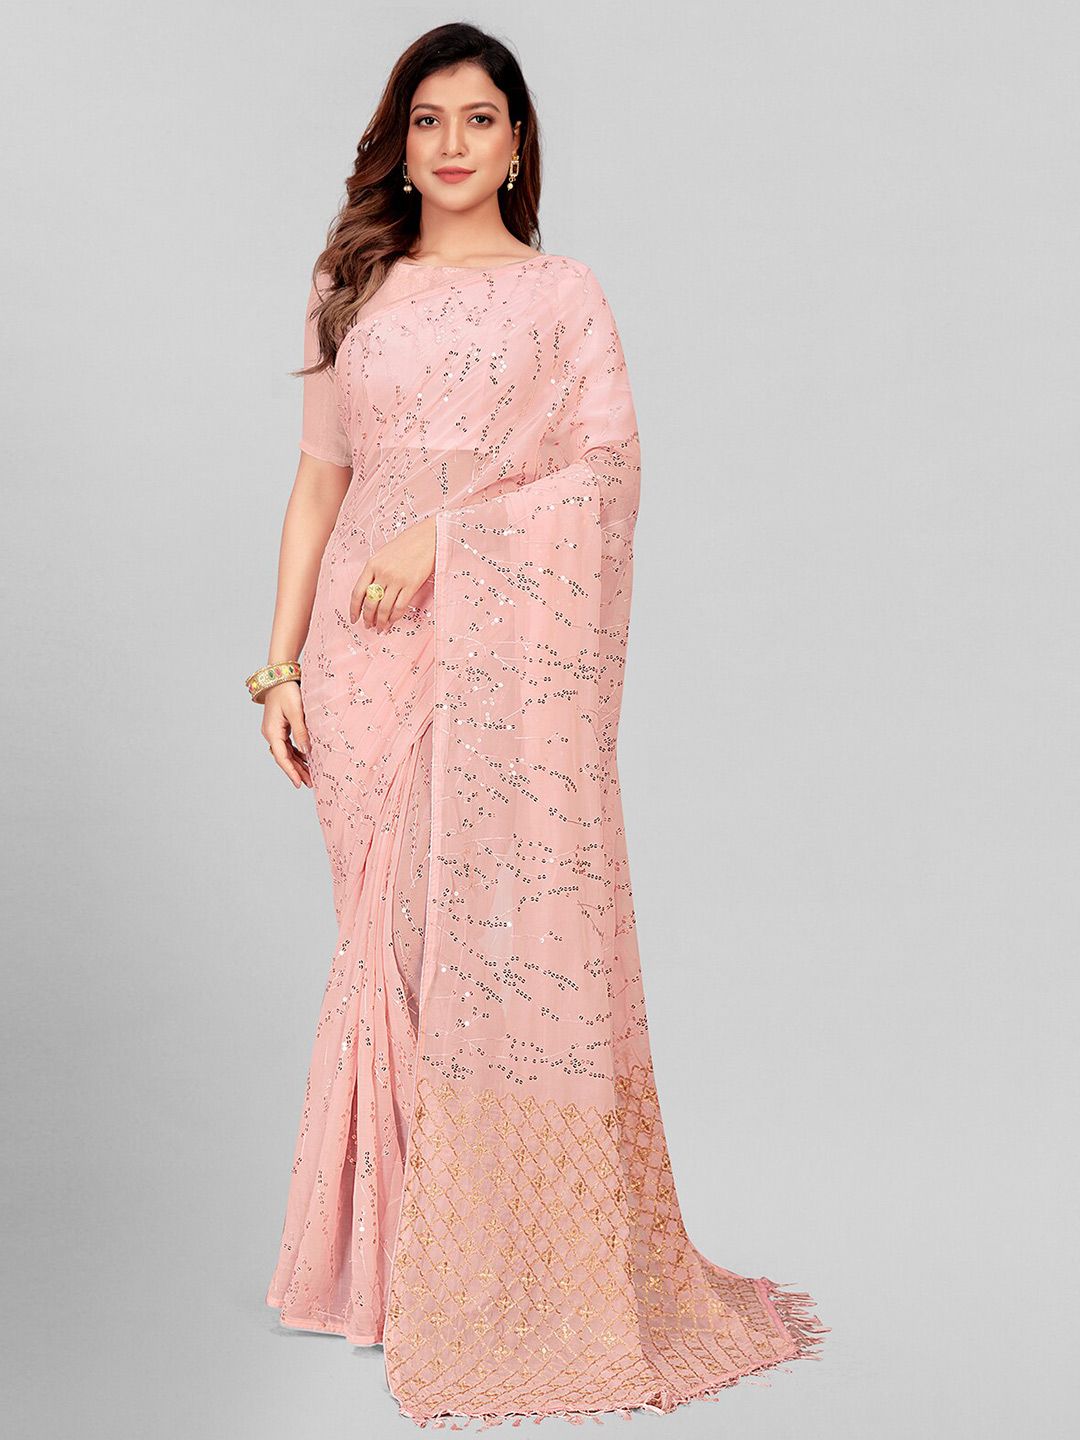 Mitera Peach-Coloured & Gold-Toned Embellished Sequinned Pure Georgette Saree Price in India